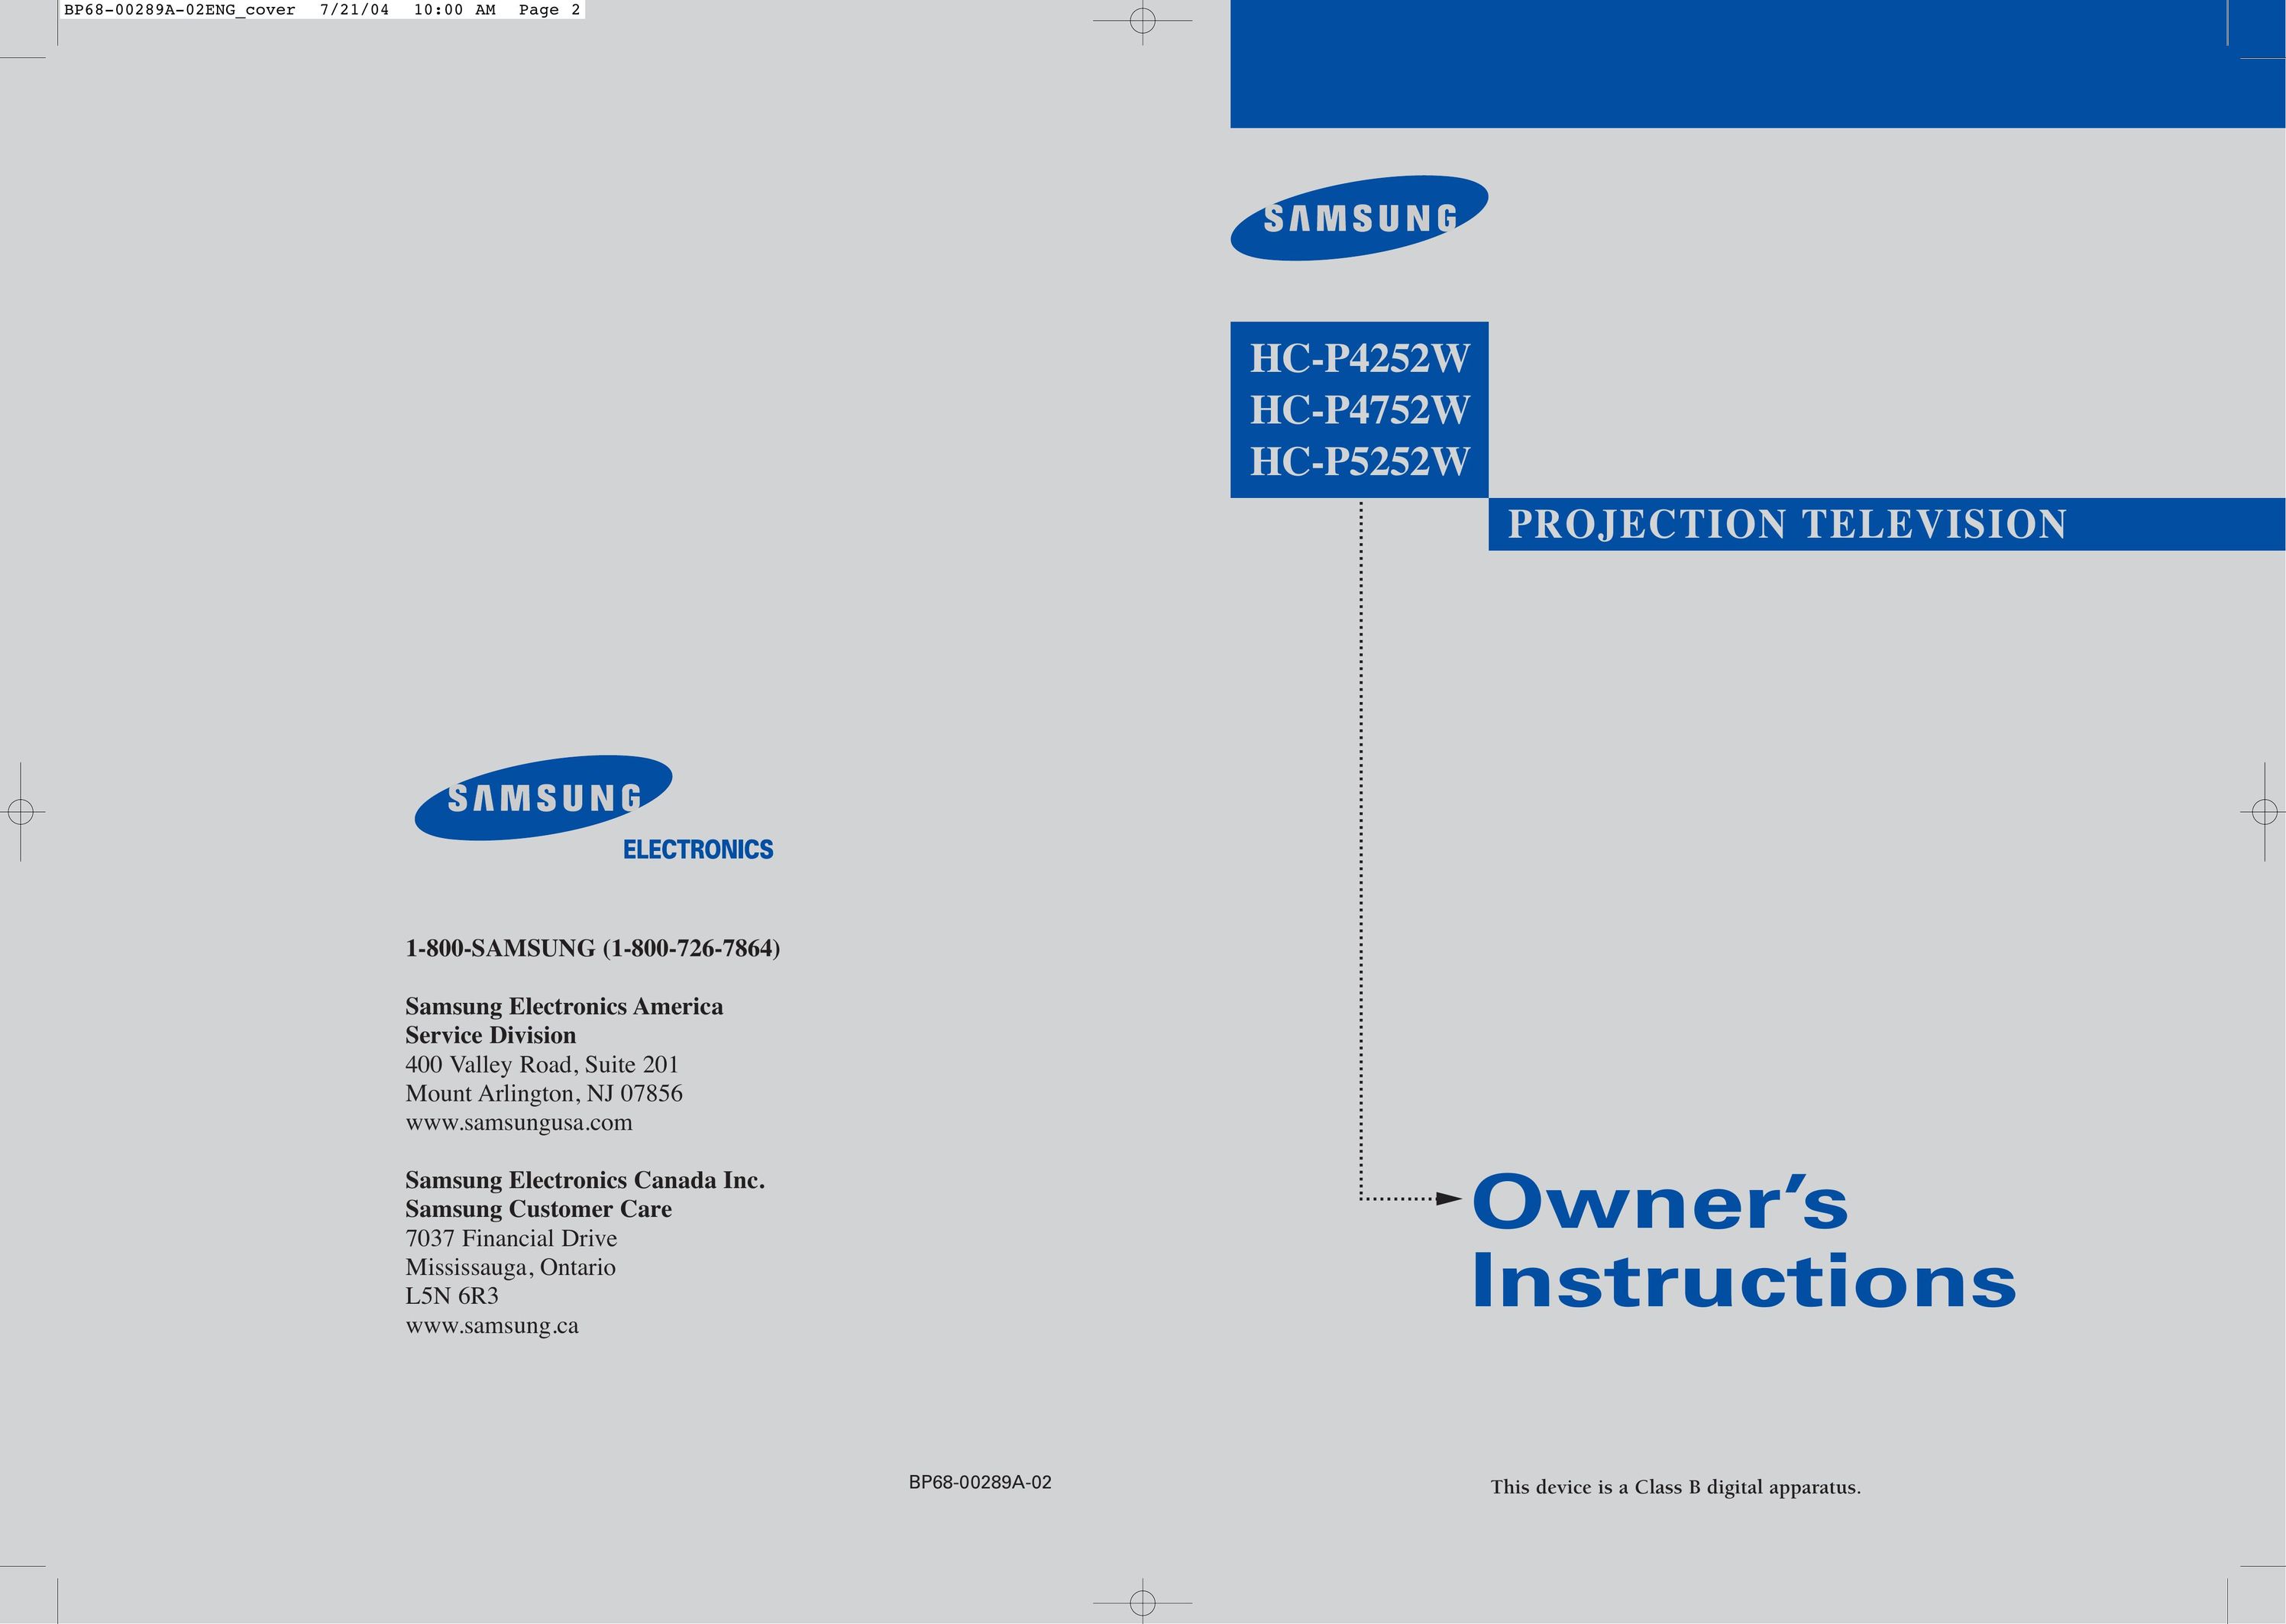 Samsung HC-P4252W Projection Television User Manual